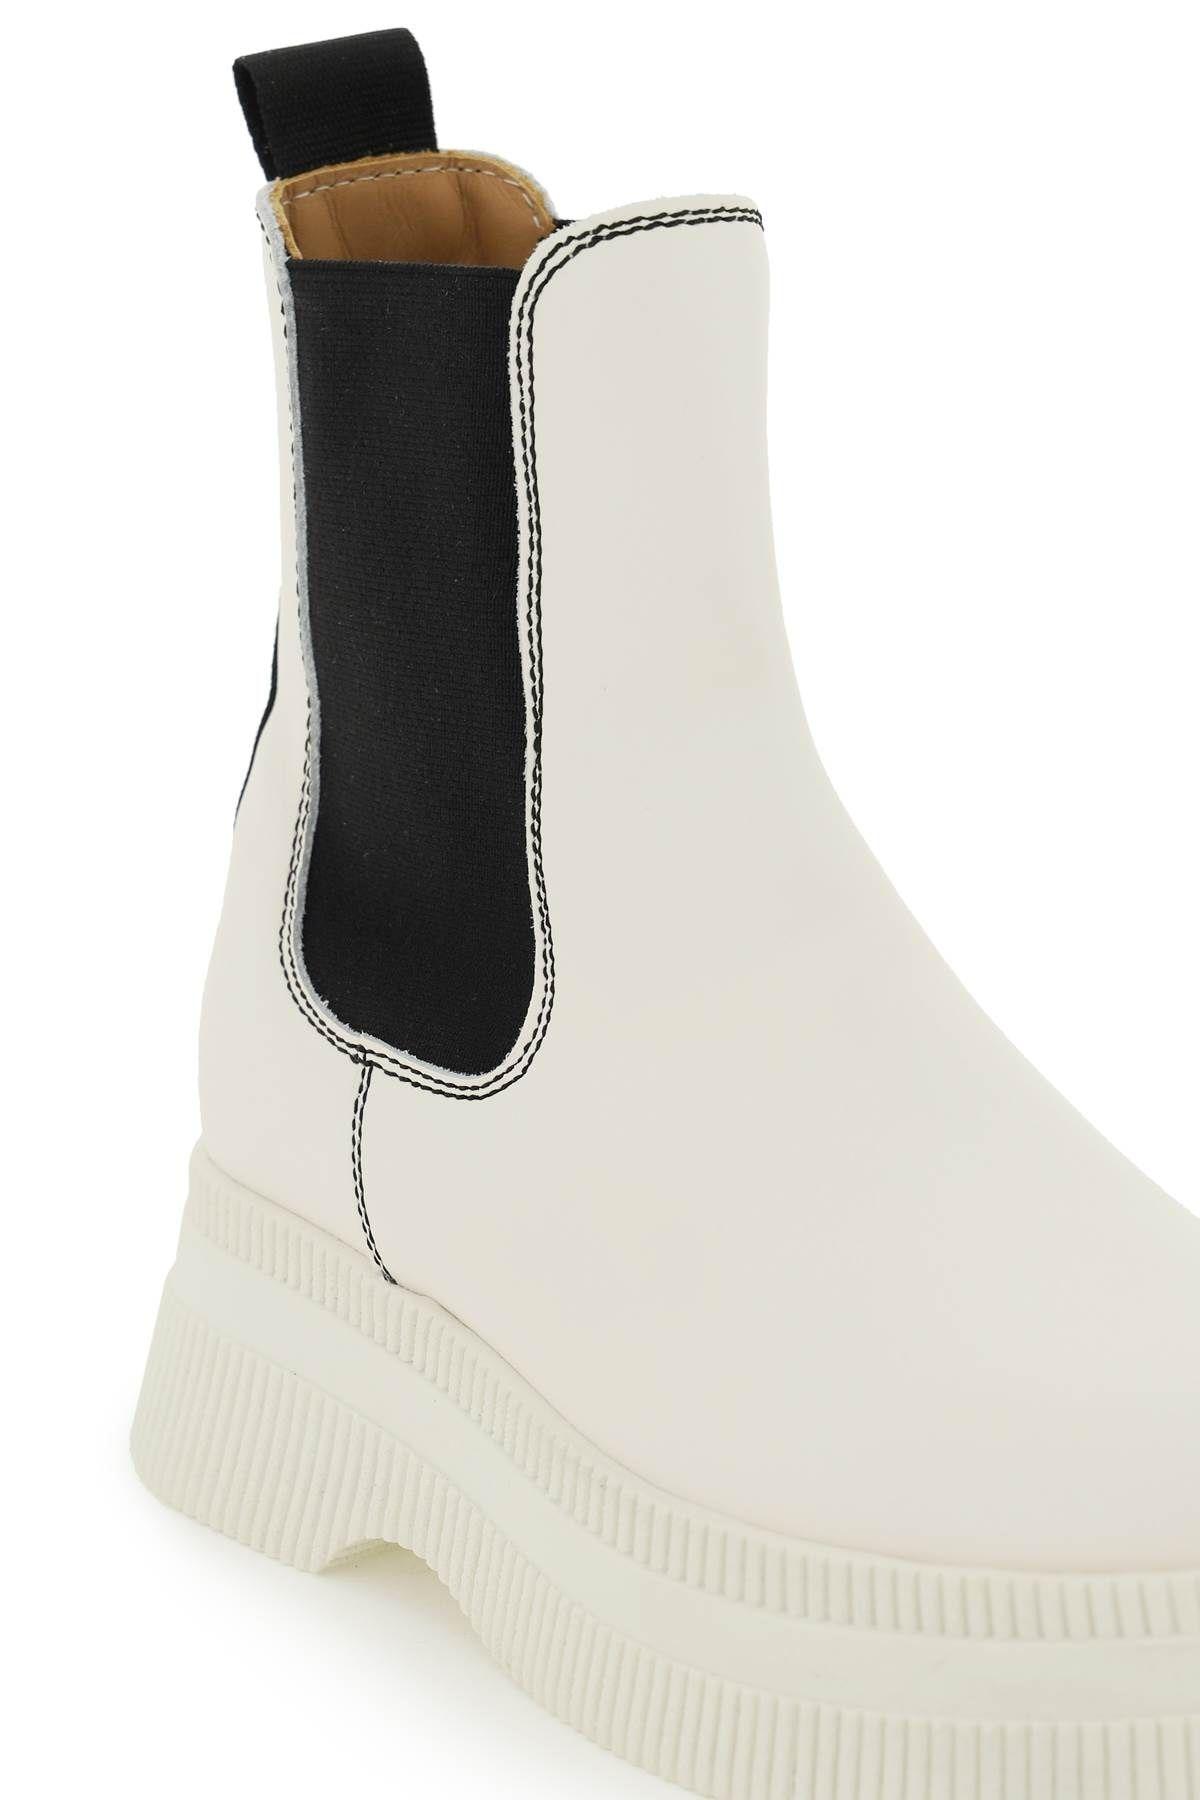 Ganni Leather Chelsea Boots